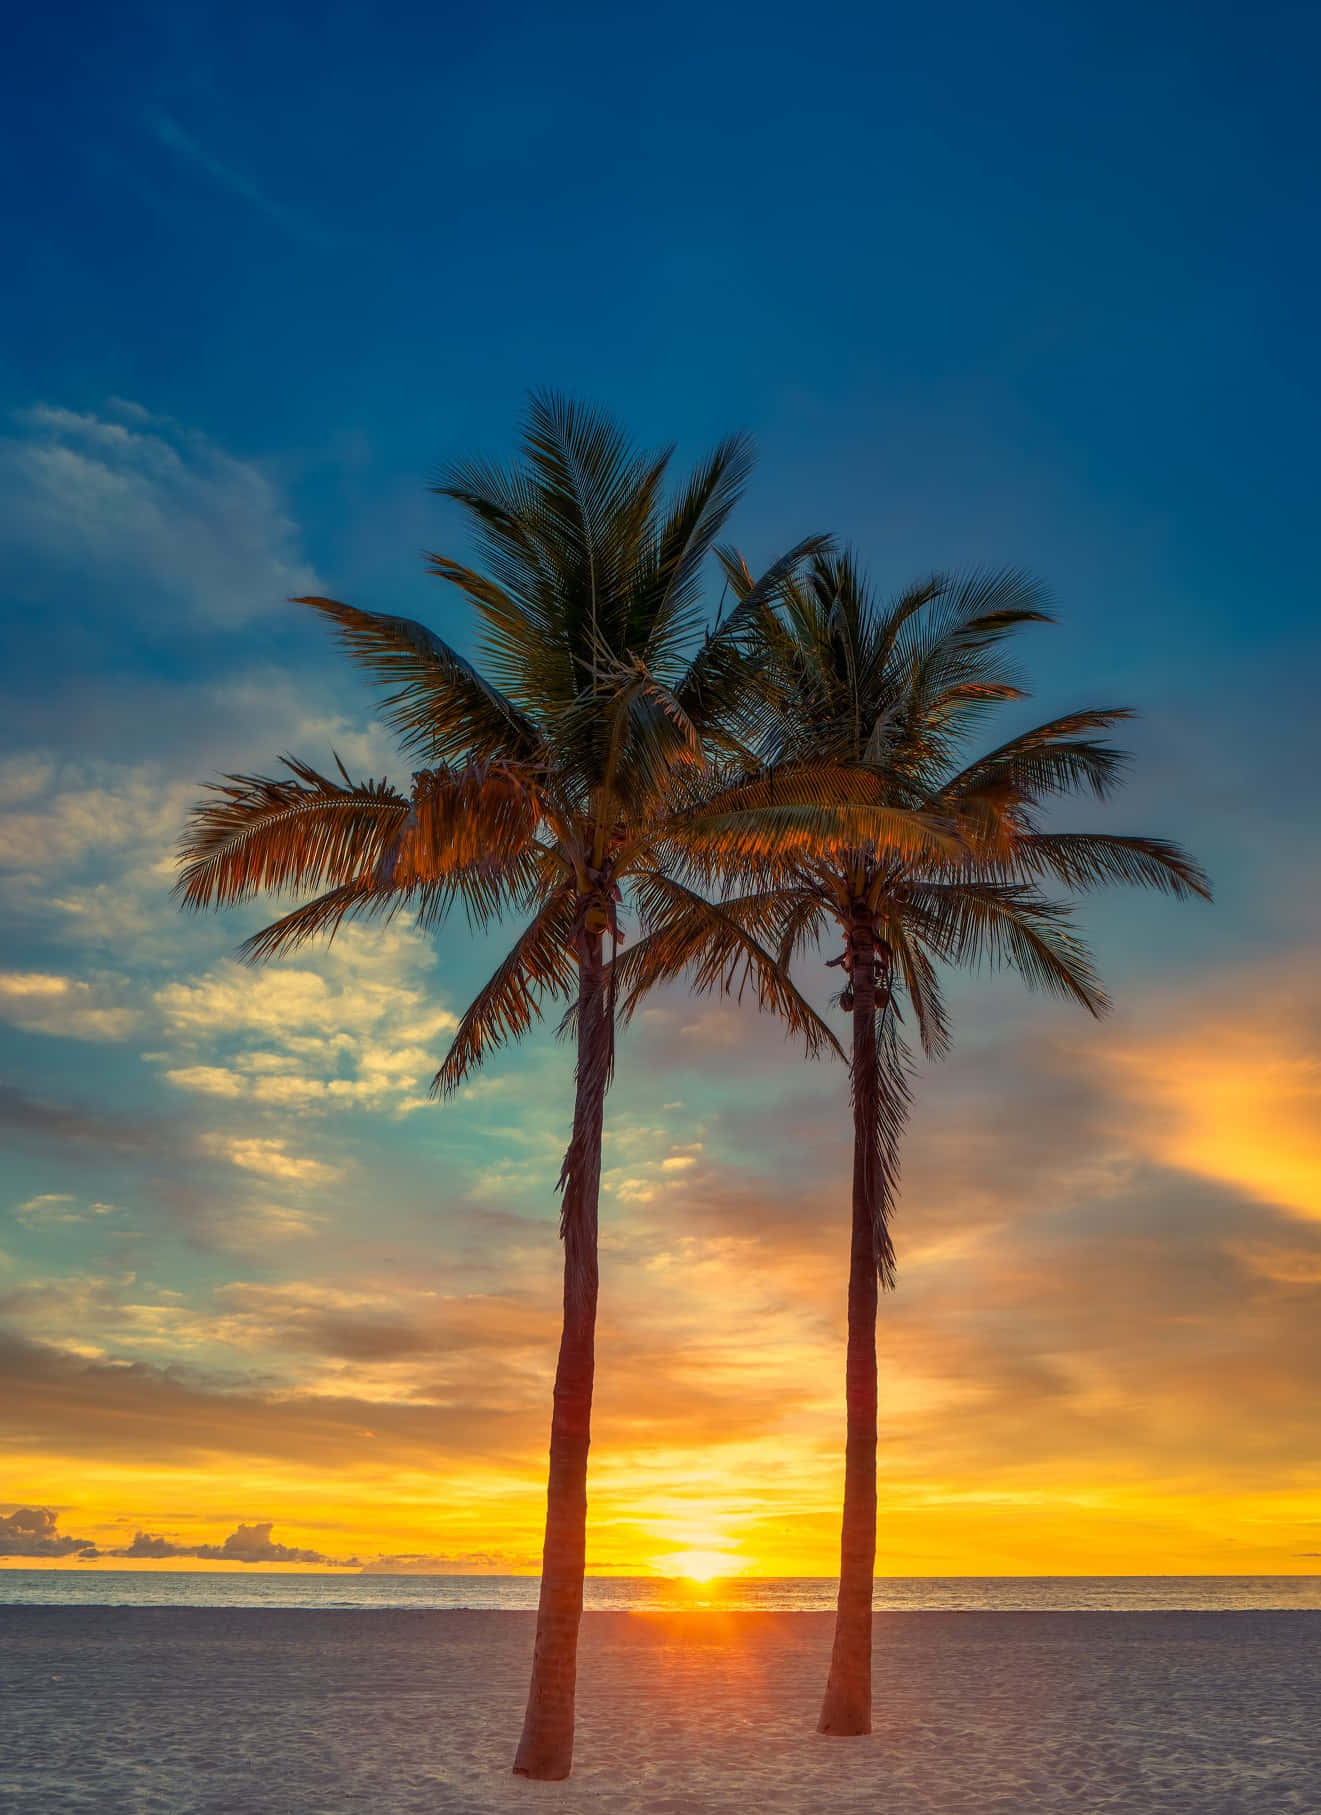 Tranquil beach scene with vibrant palm trees Wallpaper